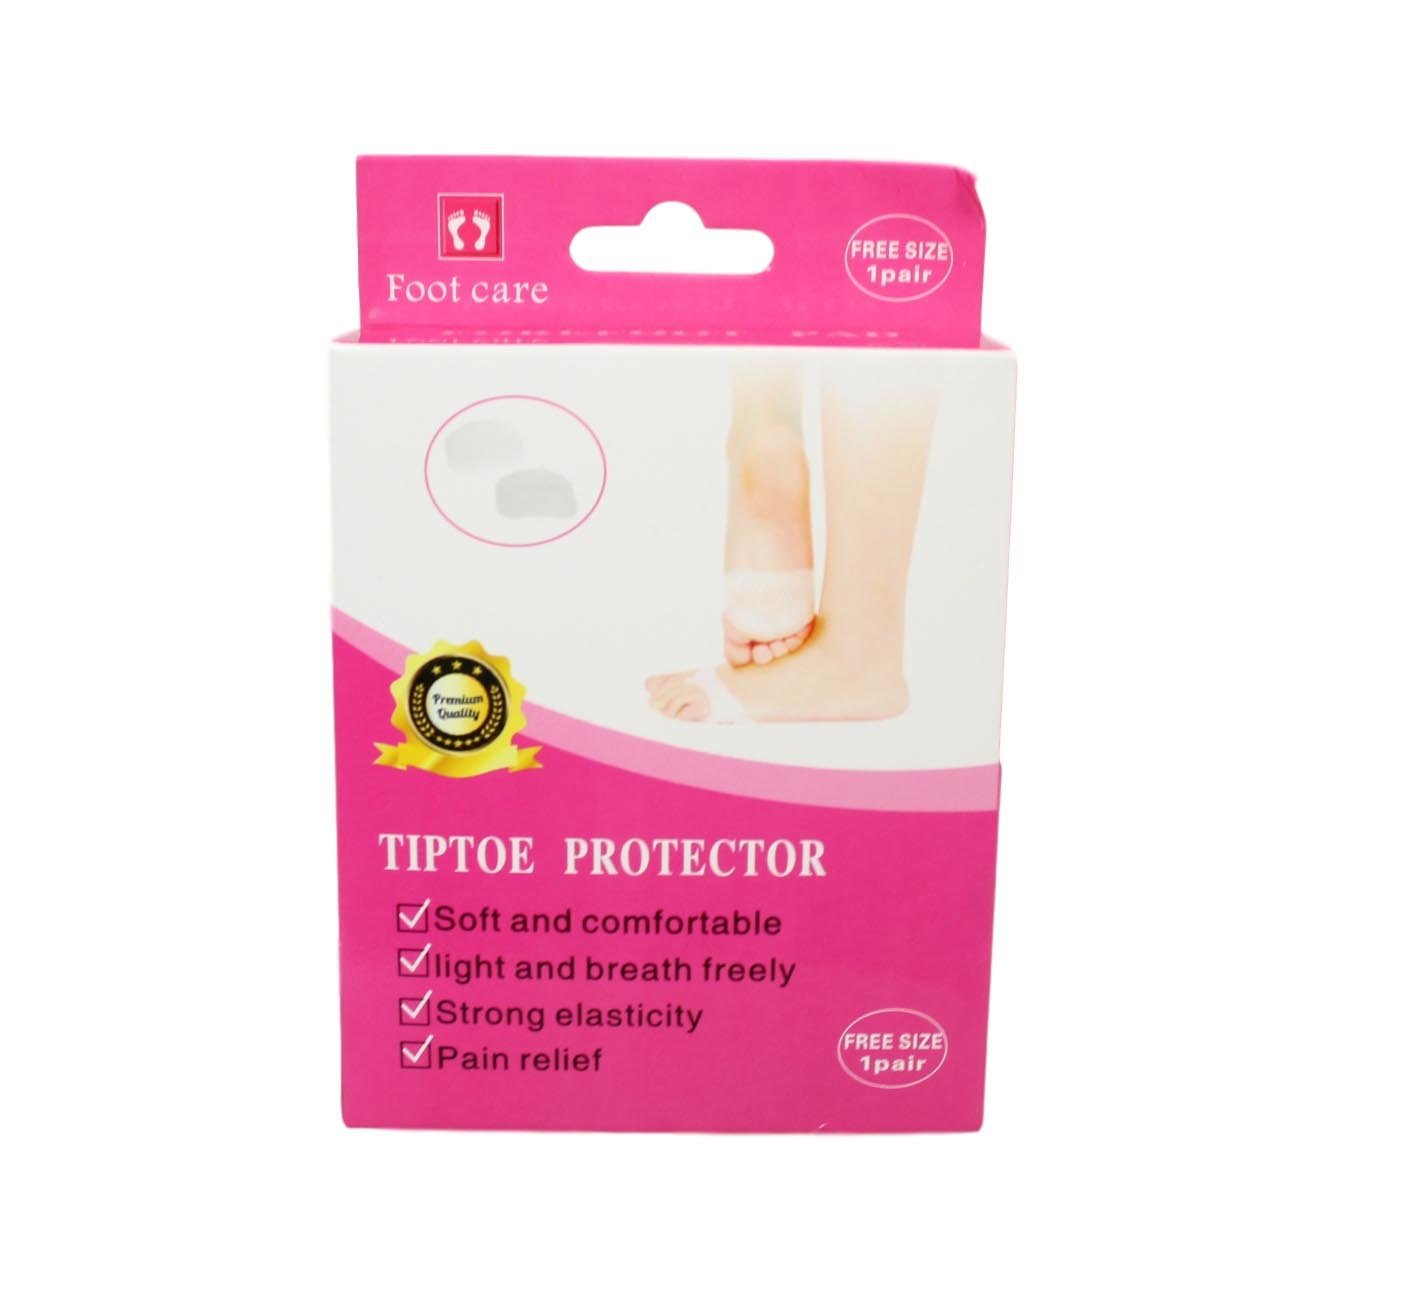 Forefoot Tiptoe Protector Soft And Comfortable Pain Relief 1 Pair 5503 (Parcel Rate)